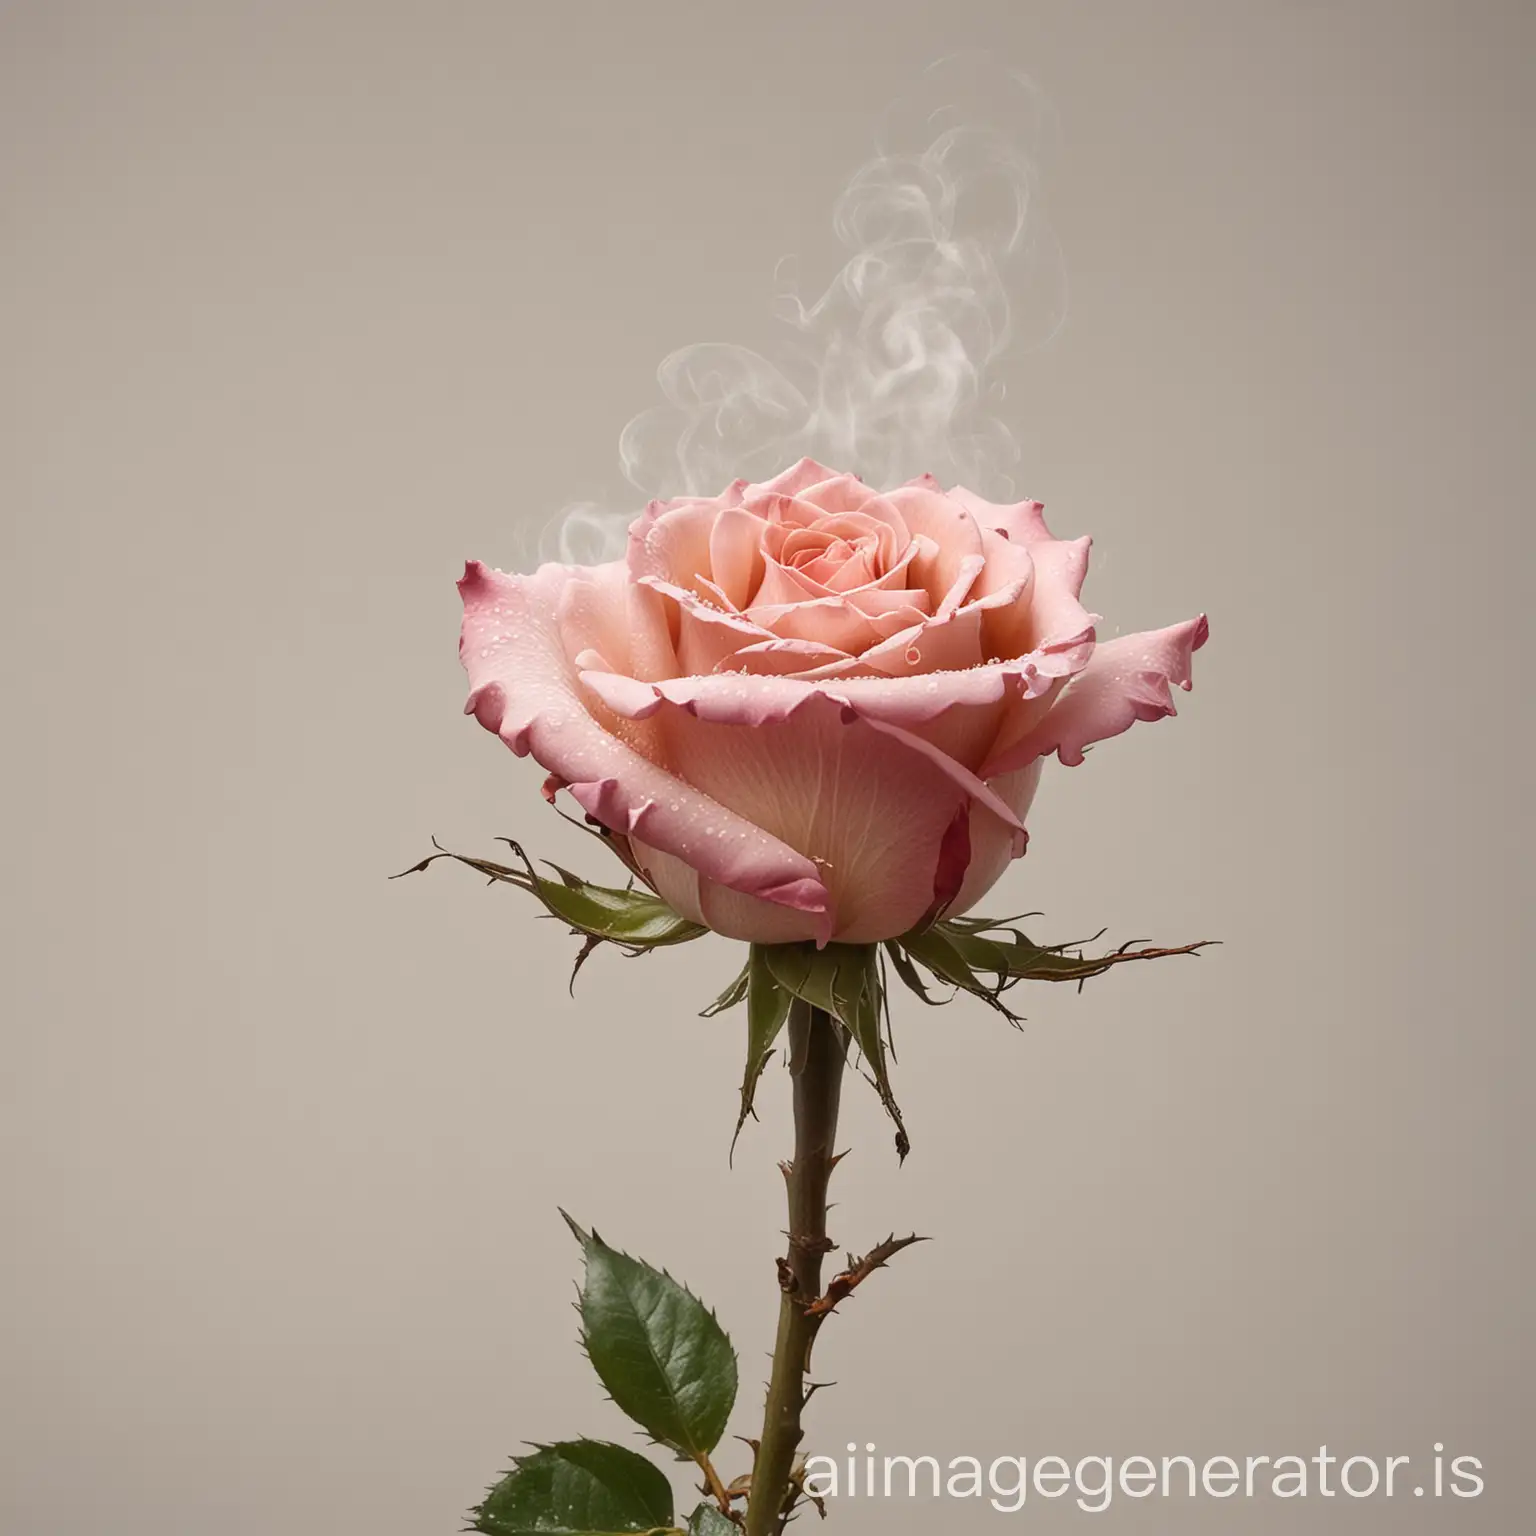 alive rose whit steam and thorns front view zoom out
with neutral background